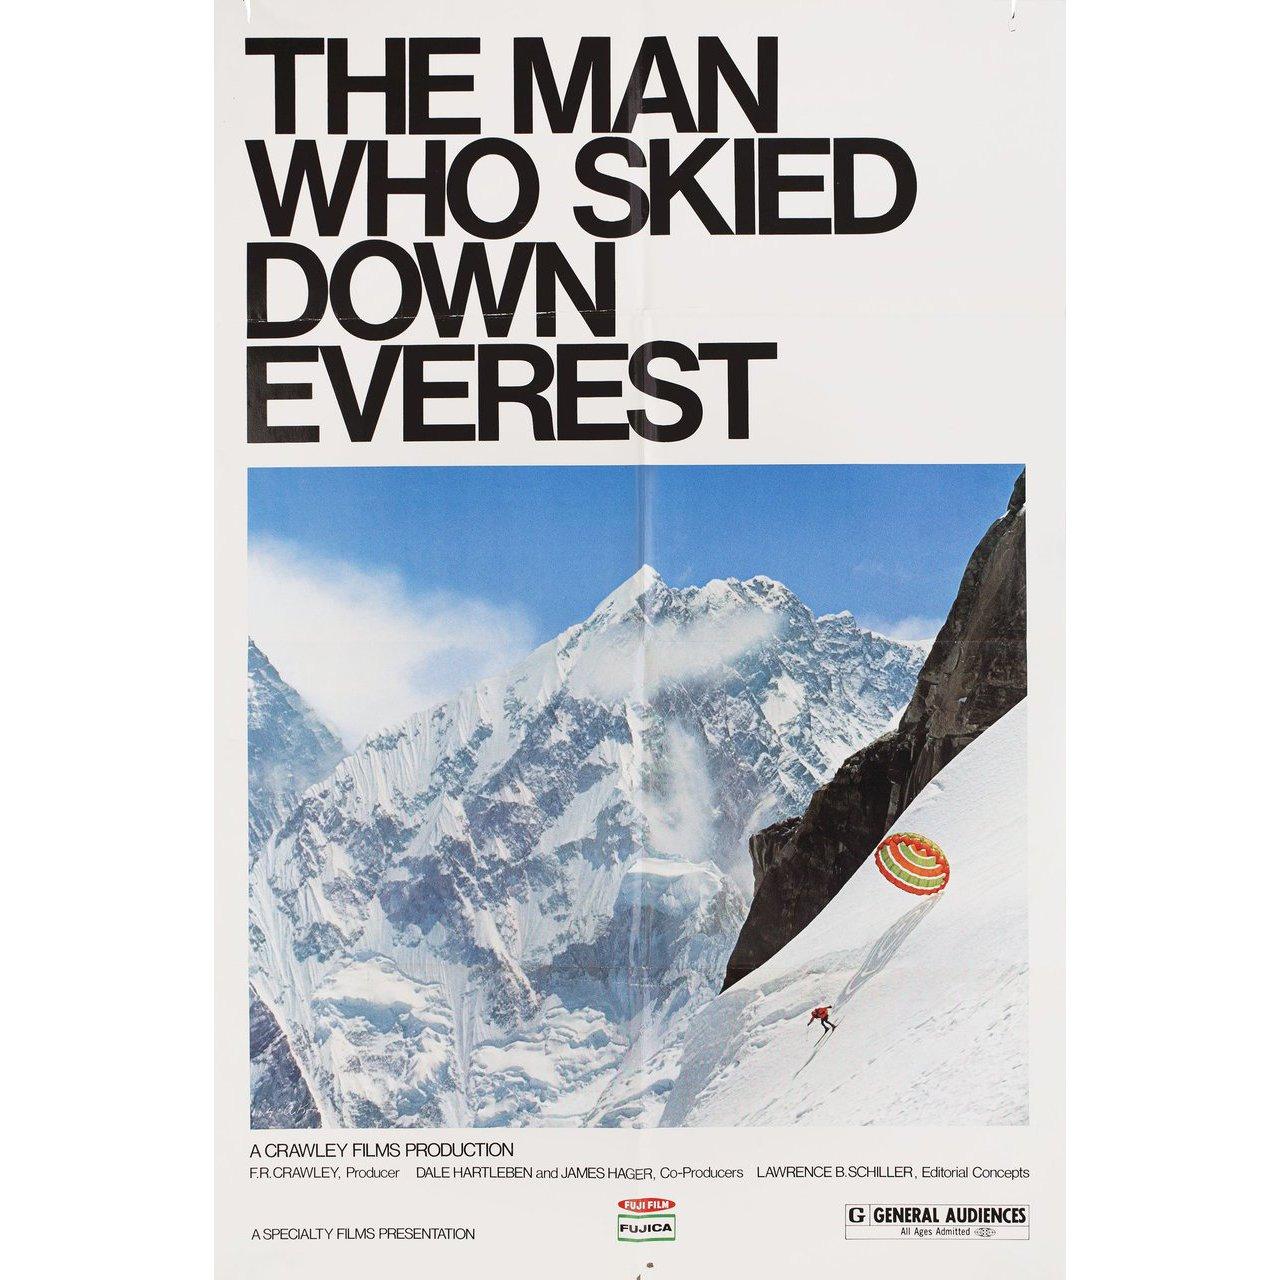 Original 1975 U.S. poster by A. Kotani for the documentary film The Man Who Skied Down Everest directed by Bruce Nyznik / Lawrence Schiller with Yuichiro Miura / Douglas Rain. Very Good-Fine condition, folded. Many original posters were issued